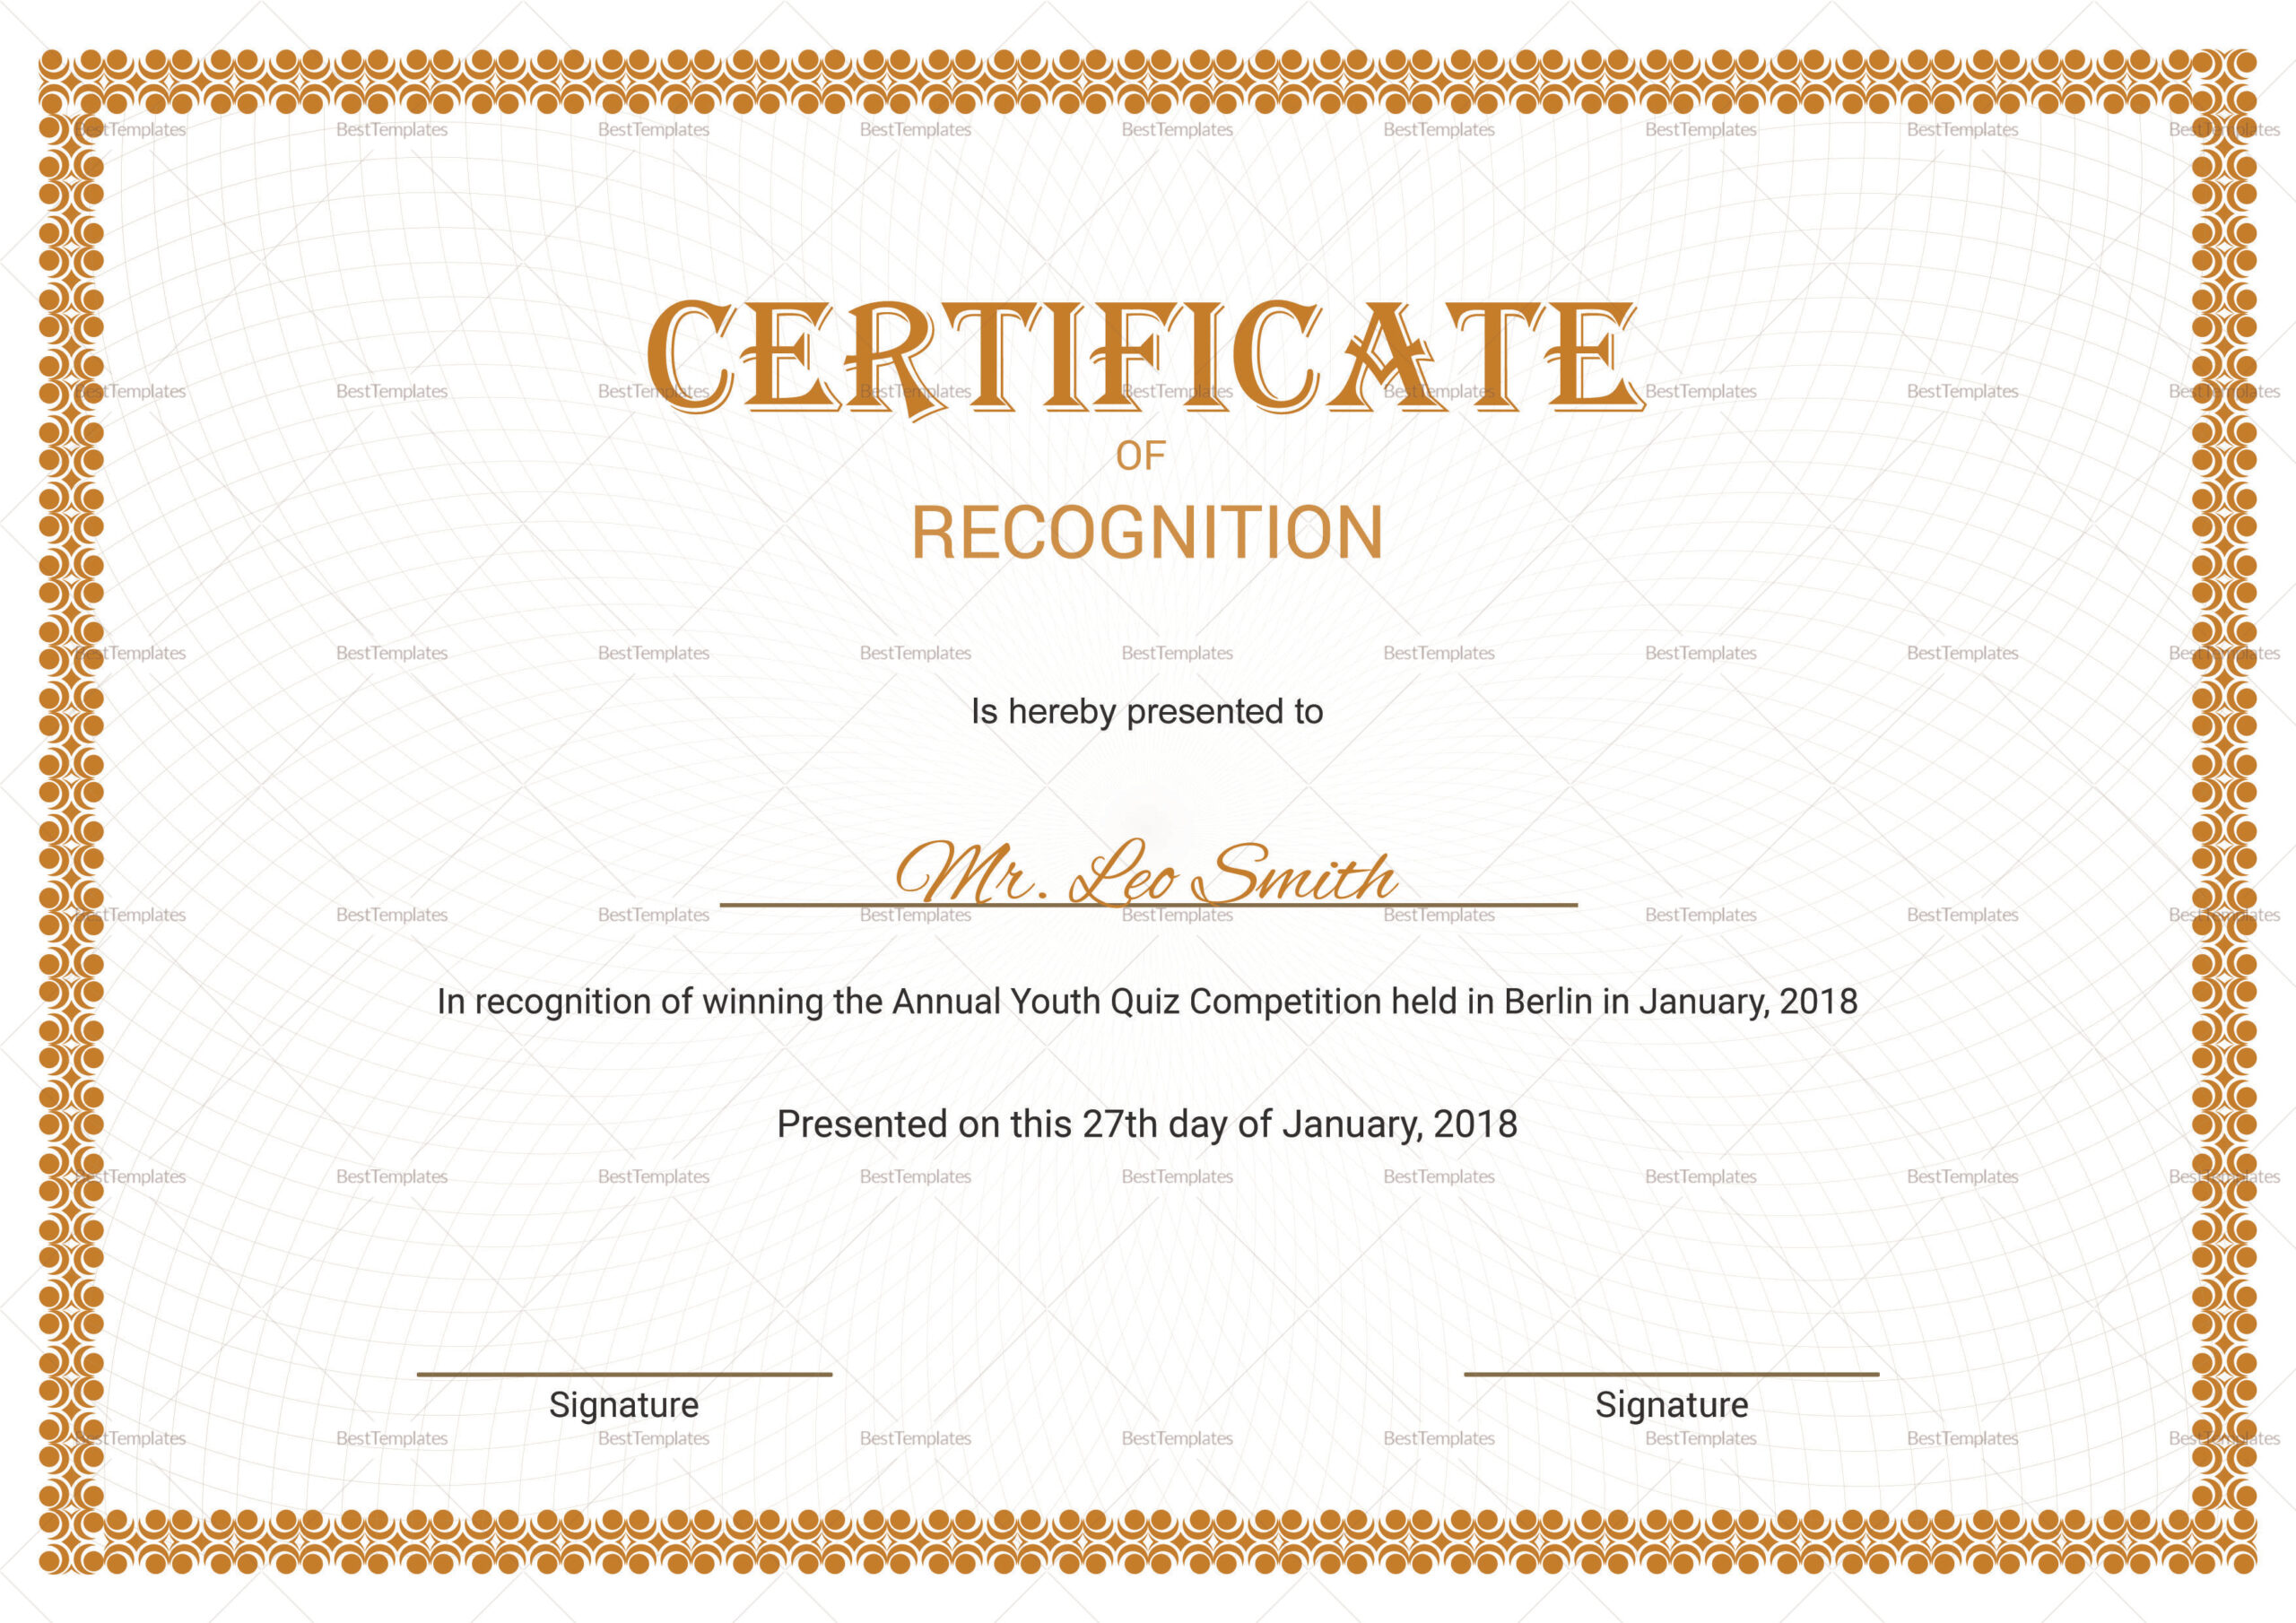 Recognition Certificate Design Template In Psd, Word inside Fascinating Certificate Of Recognition Template Word